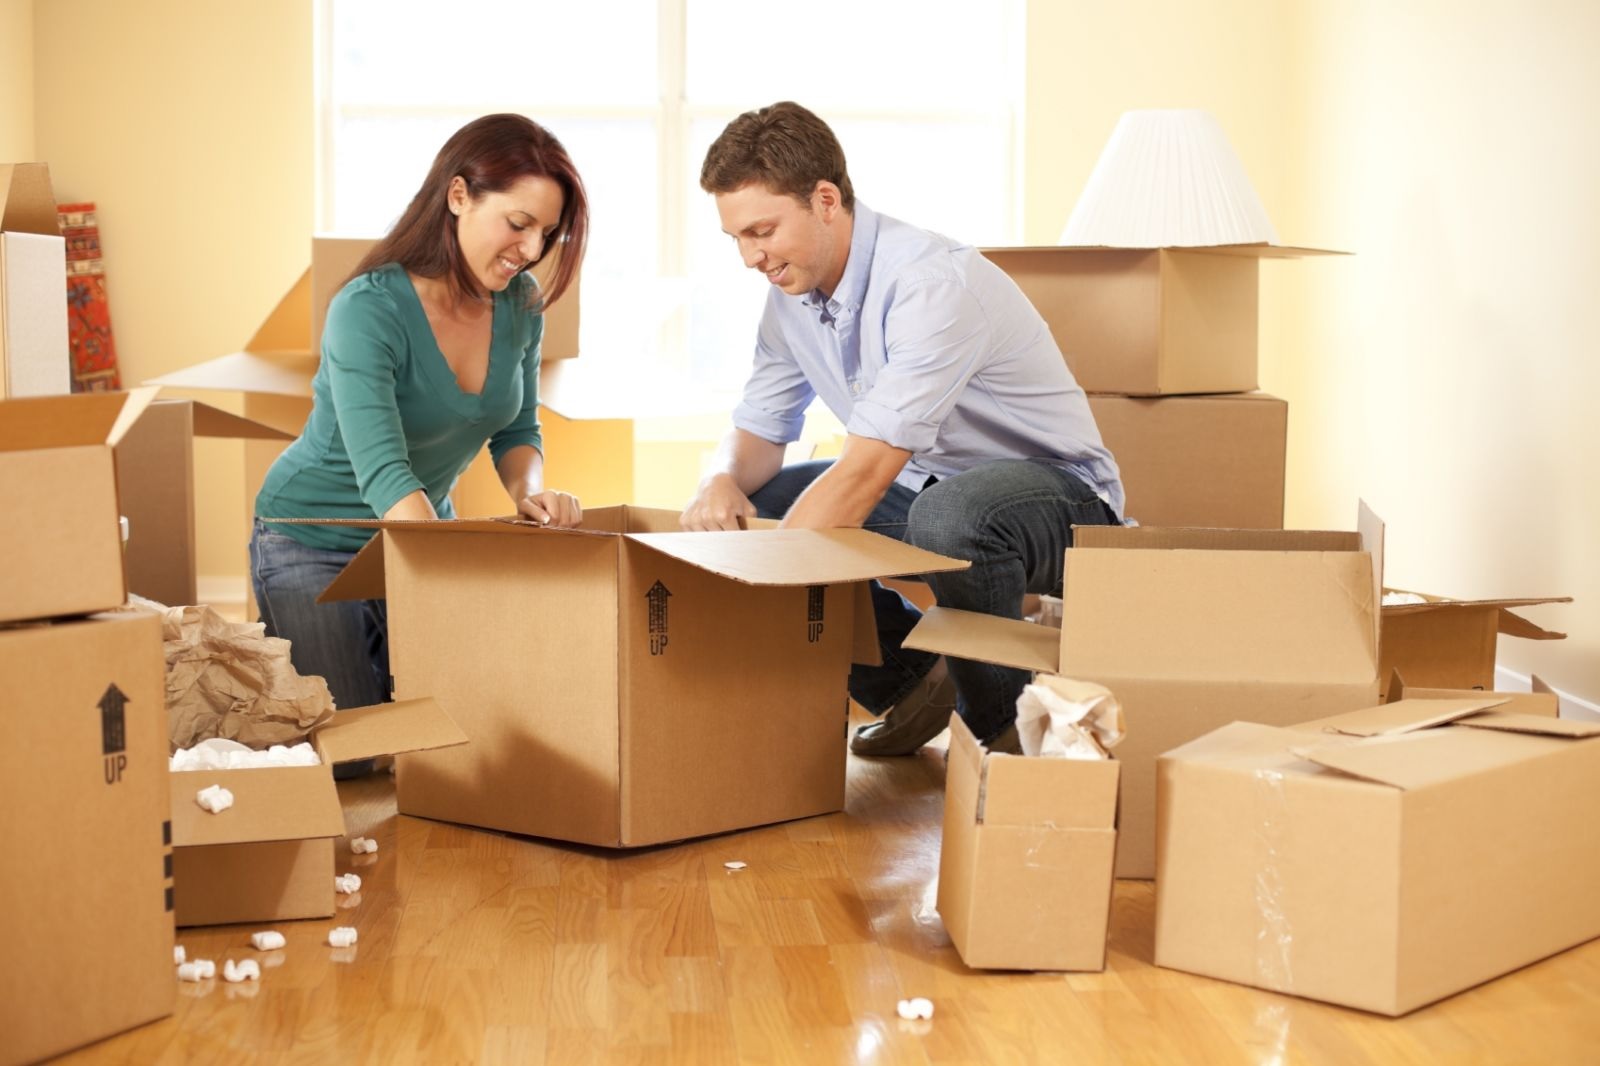 Packers vs. Removalists – Understanding the key differences